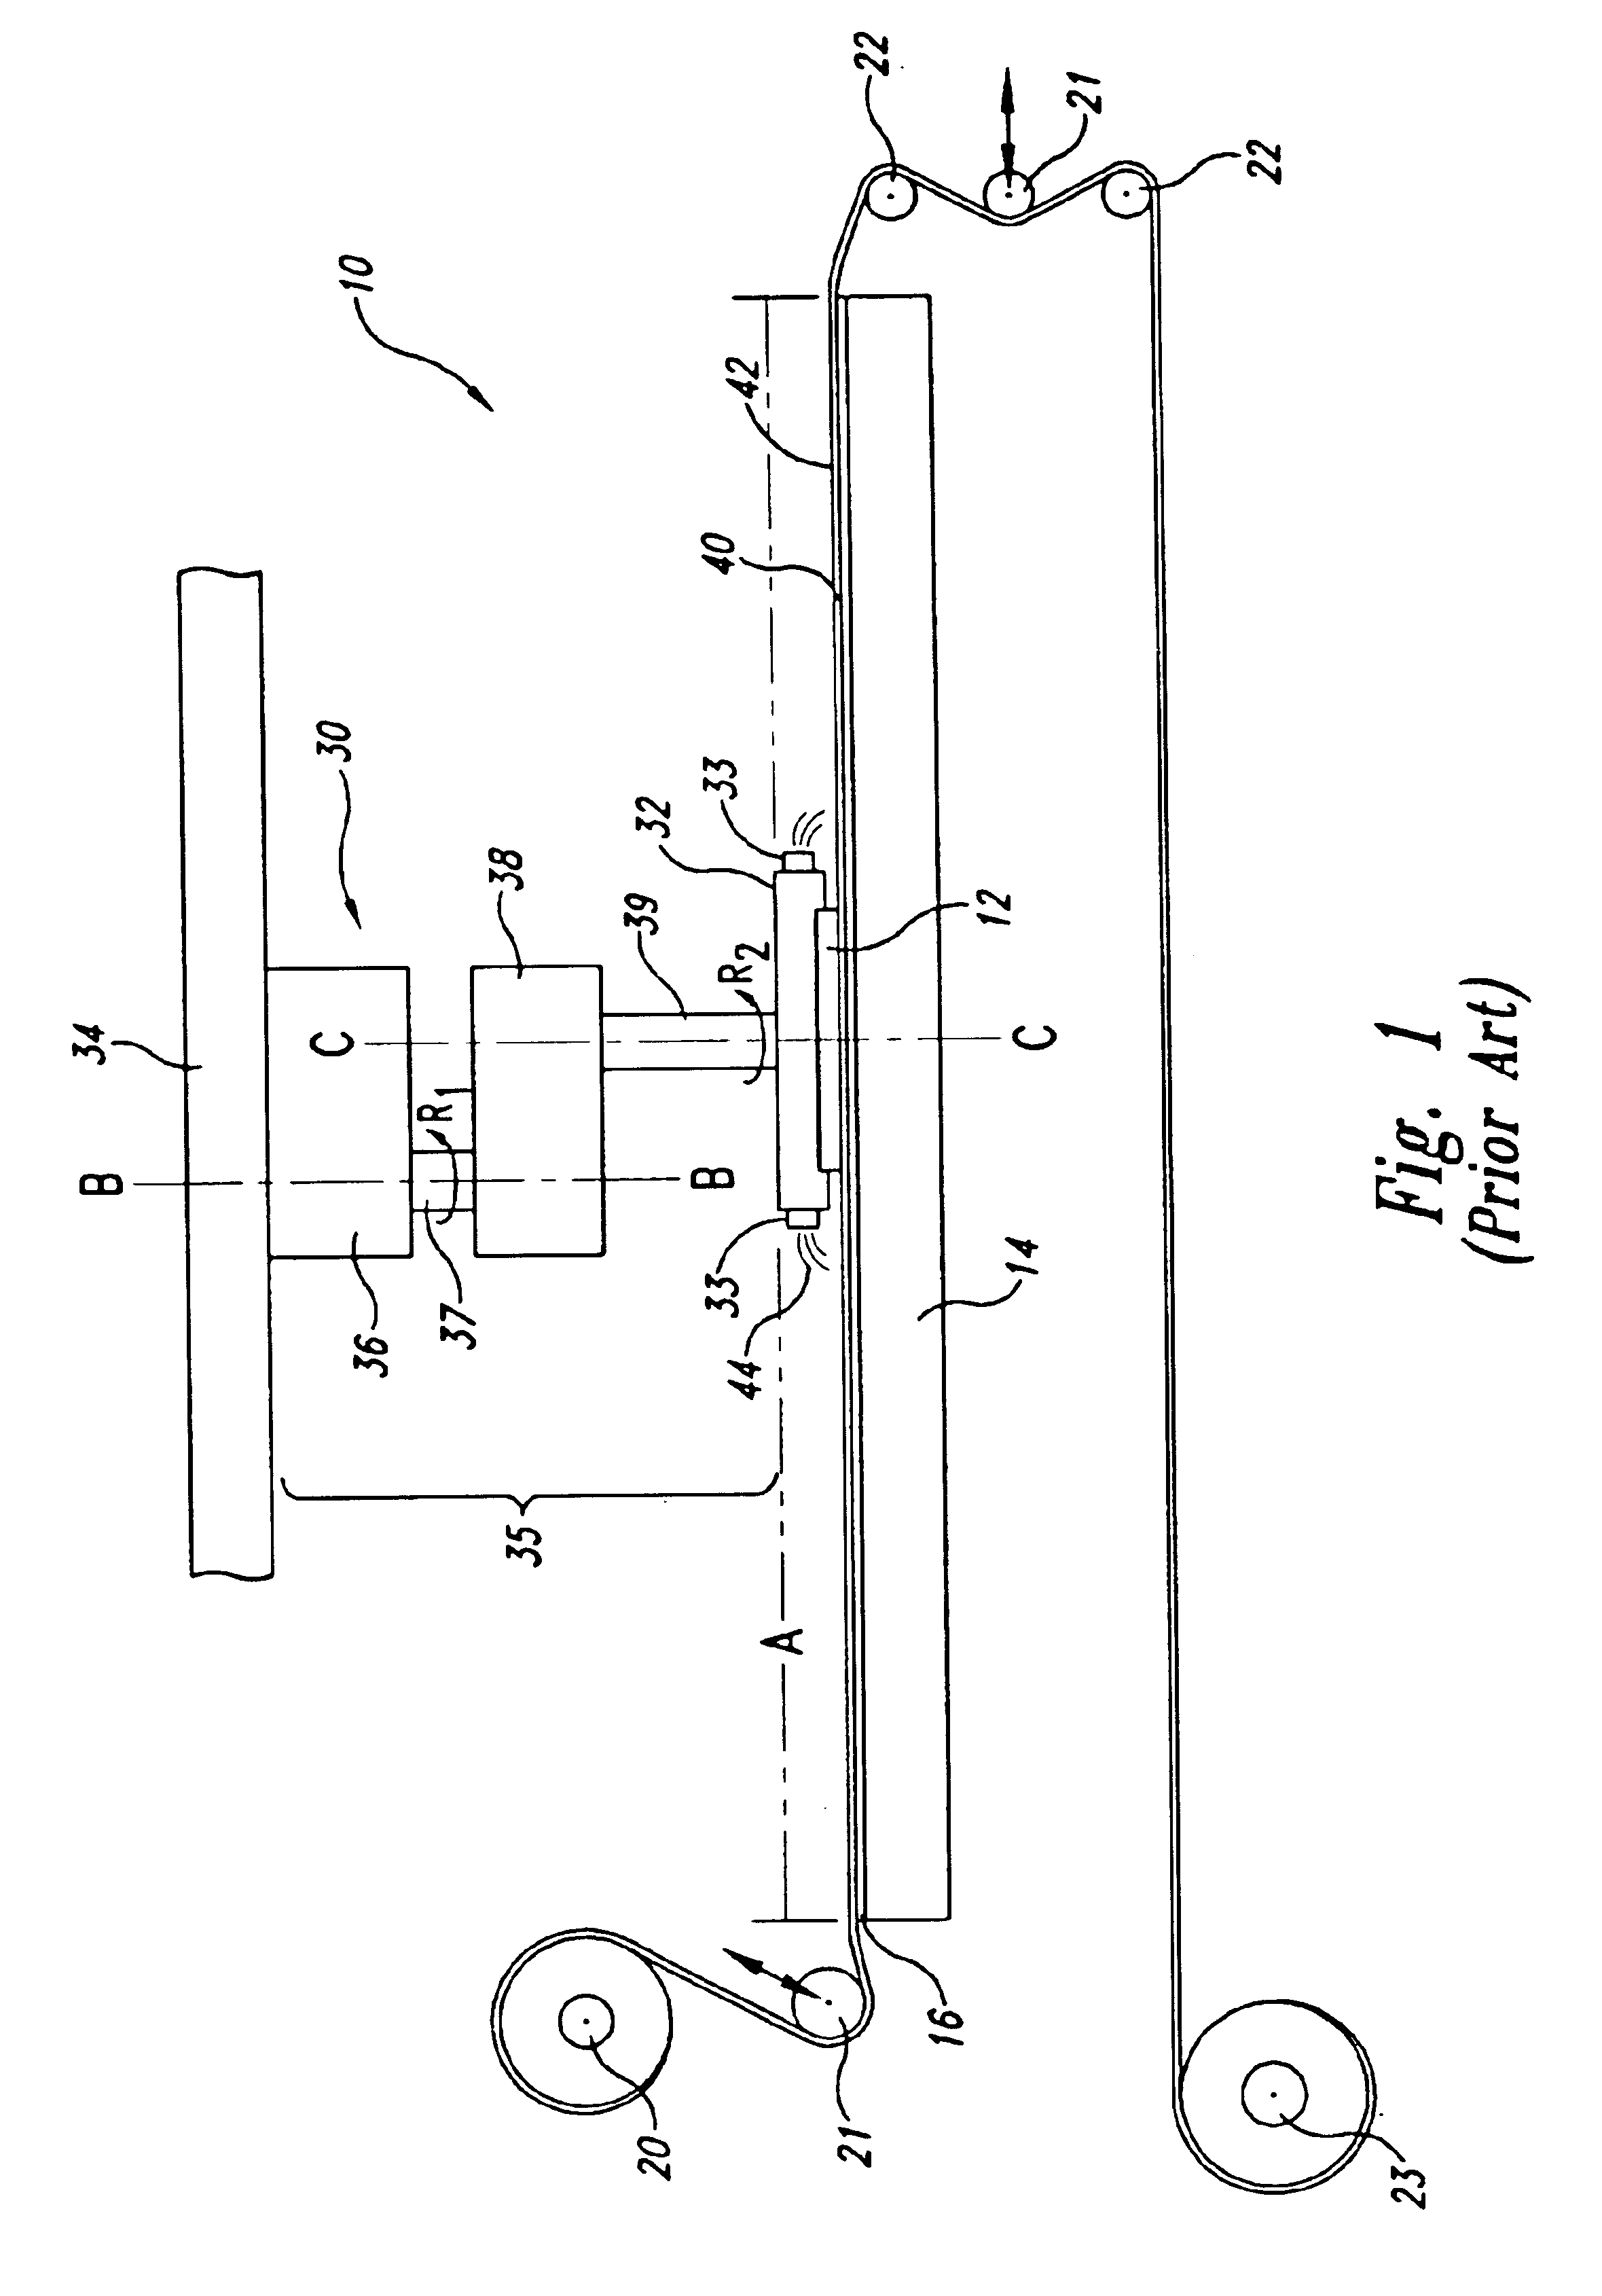 Method and apparatus for forming a planarizing pad having a film and texture elements for planarization of microelectronic substrates